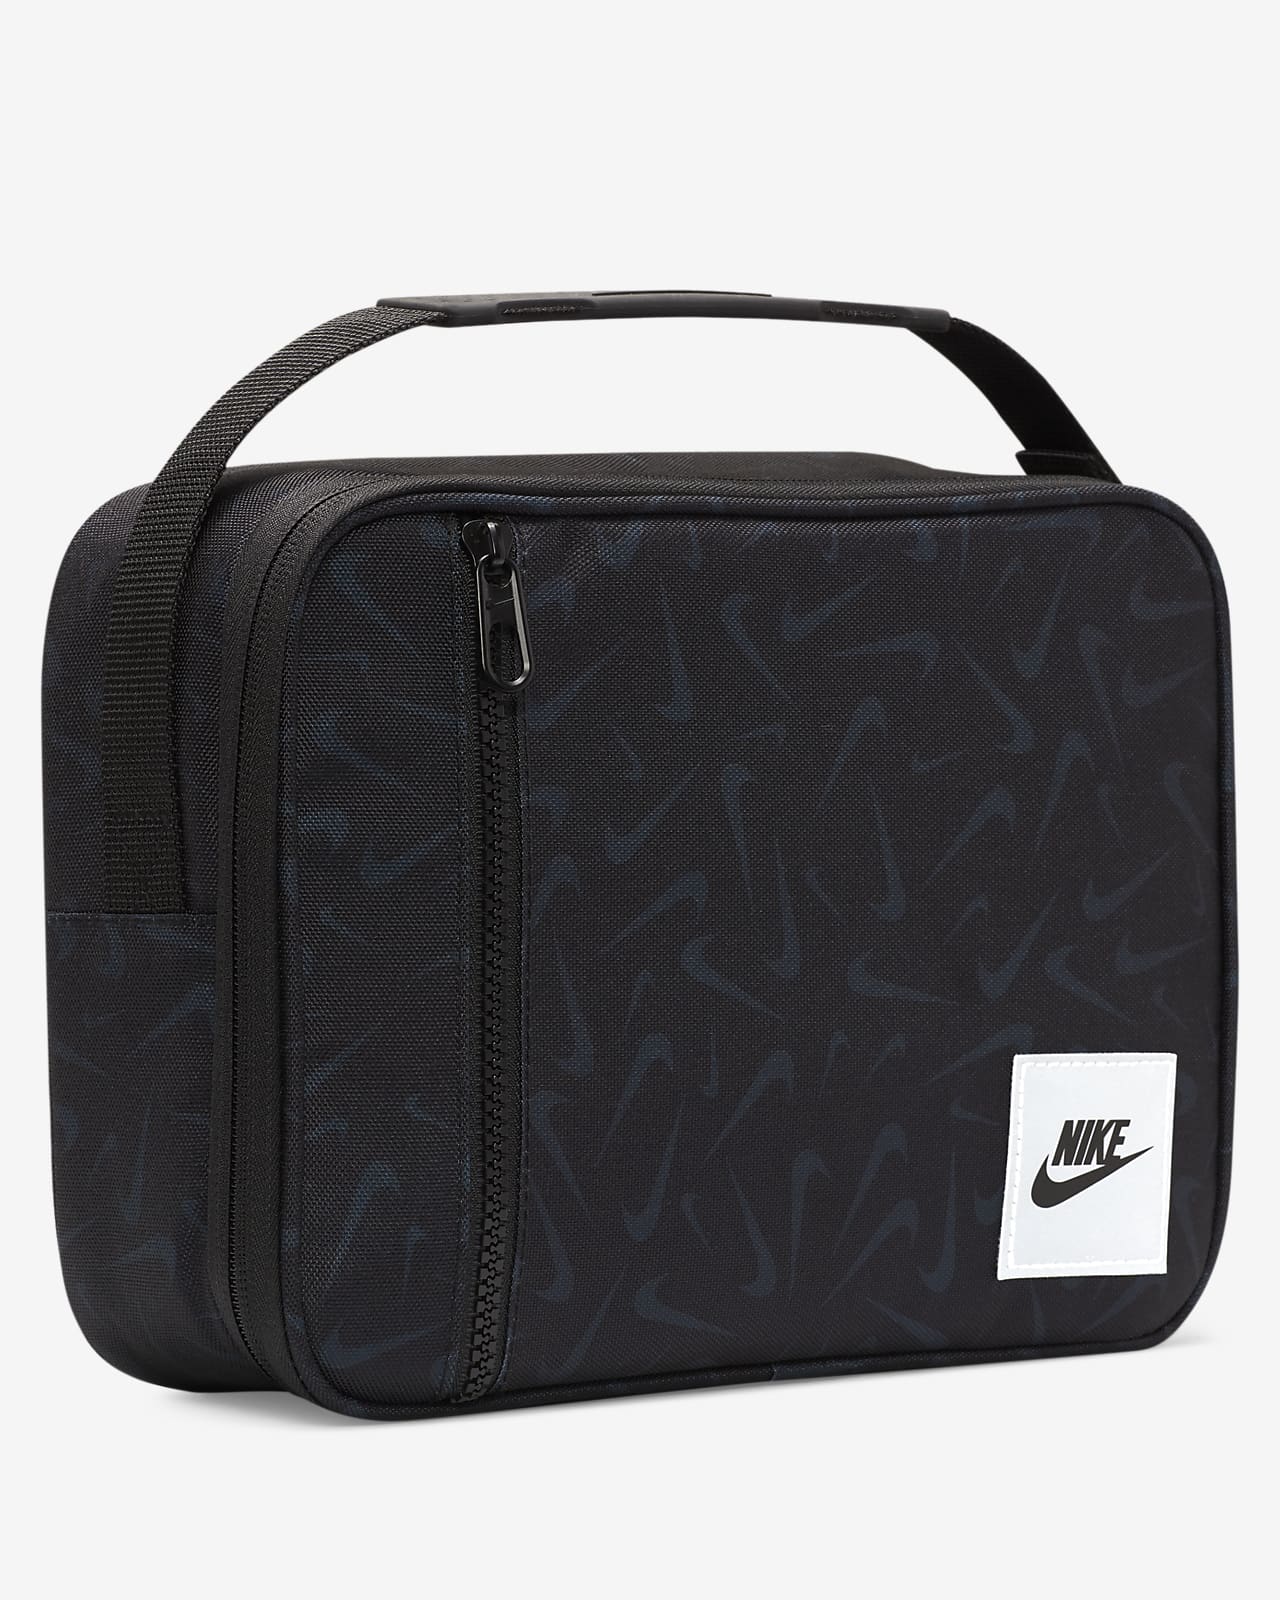 https://static.nike.com/a/images/t_PDP_1280_v1/f_auto,q_auto:eco/151e4850-dfc4-47e3-b62f-c4ca2e522a32/hardliner-lunch-bag-lunch-bag-4l-wgVhz0.png